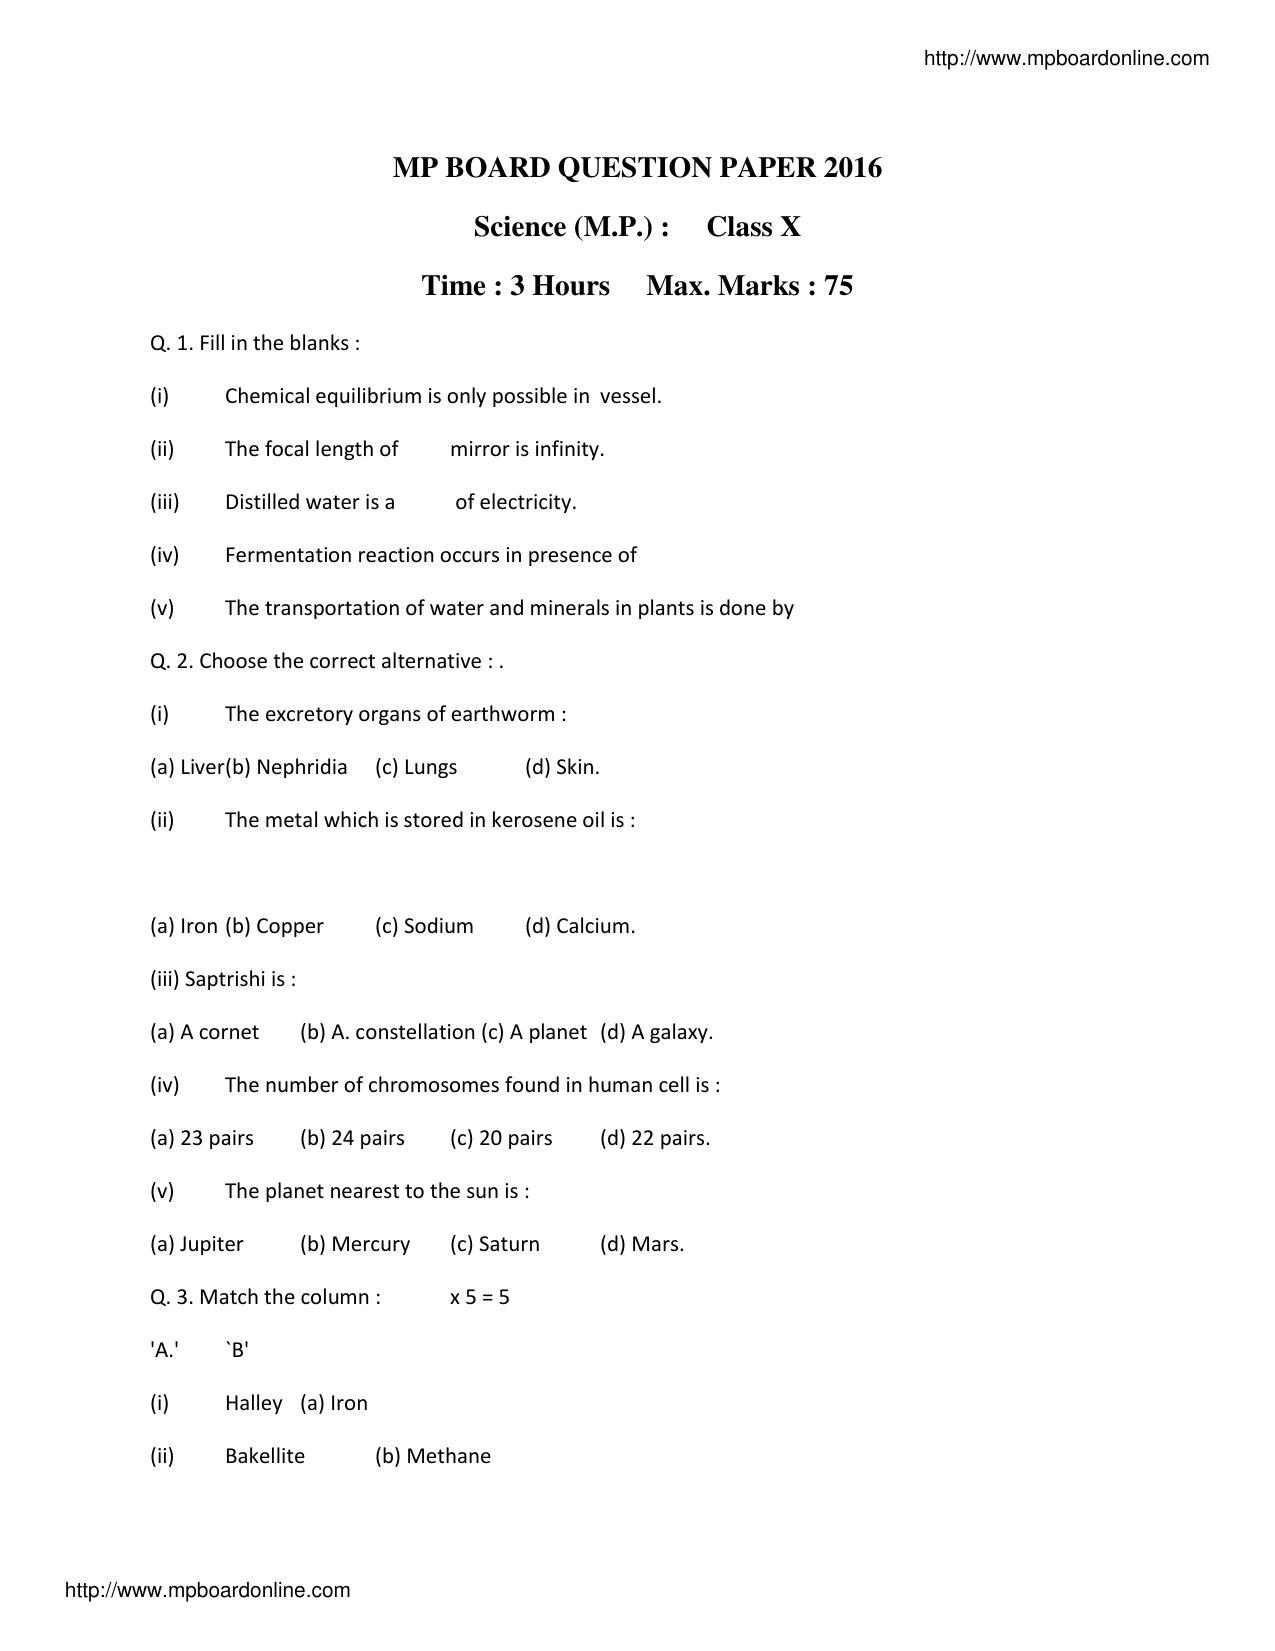 MP Board Class 10 Science 2016 Question Paper - Page 1